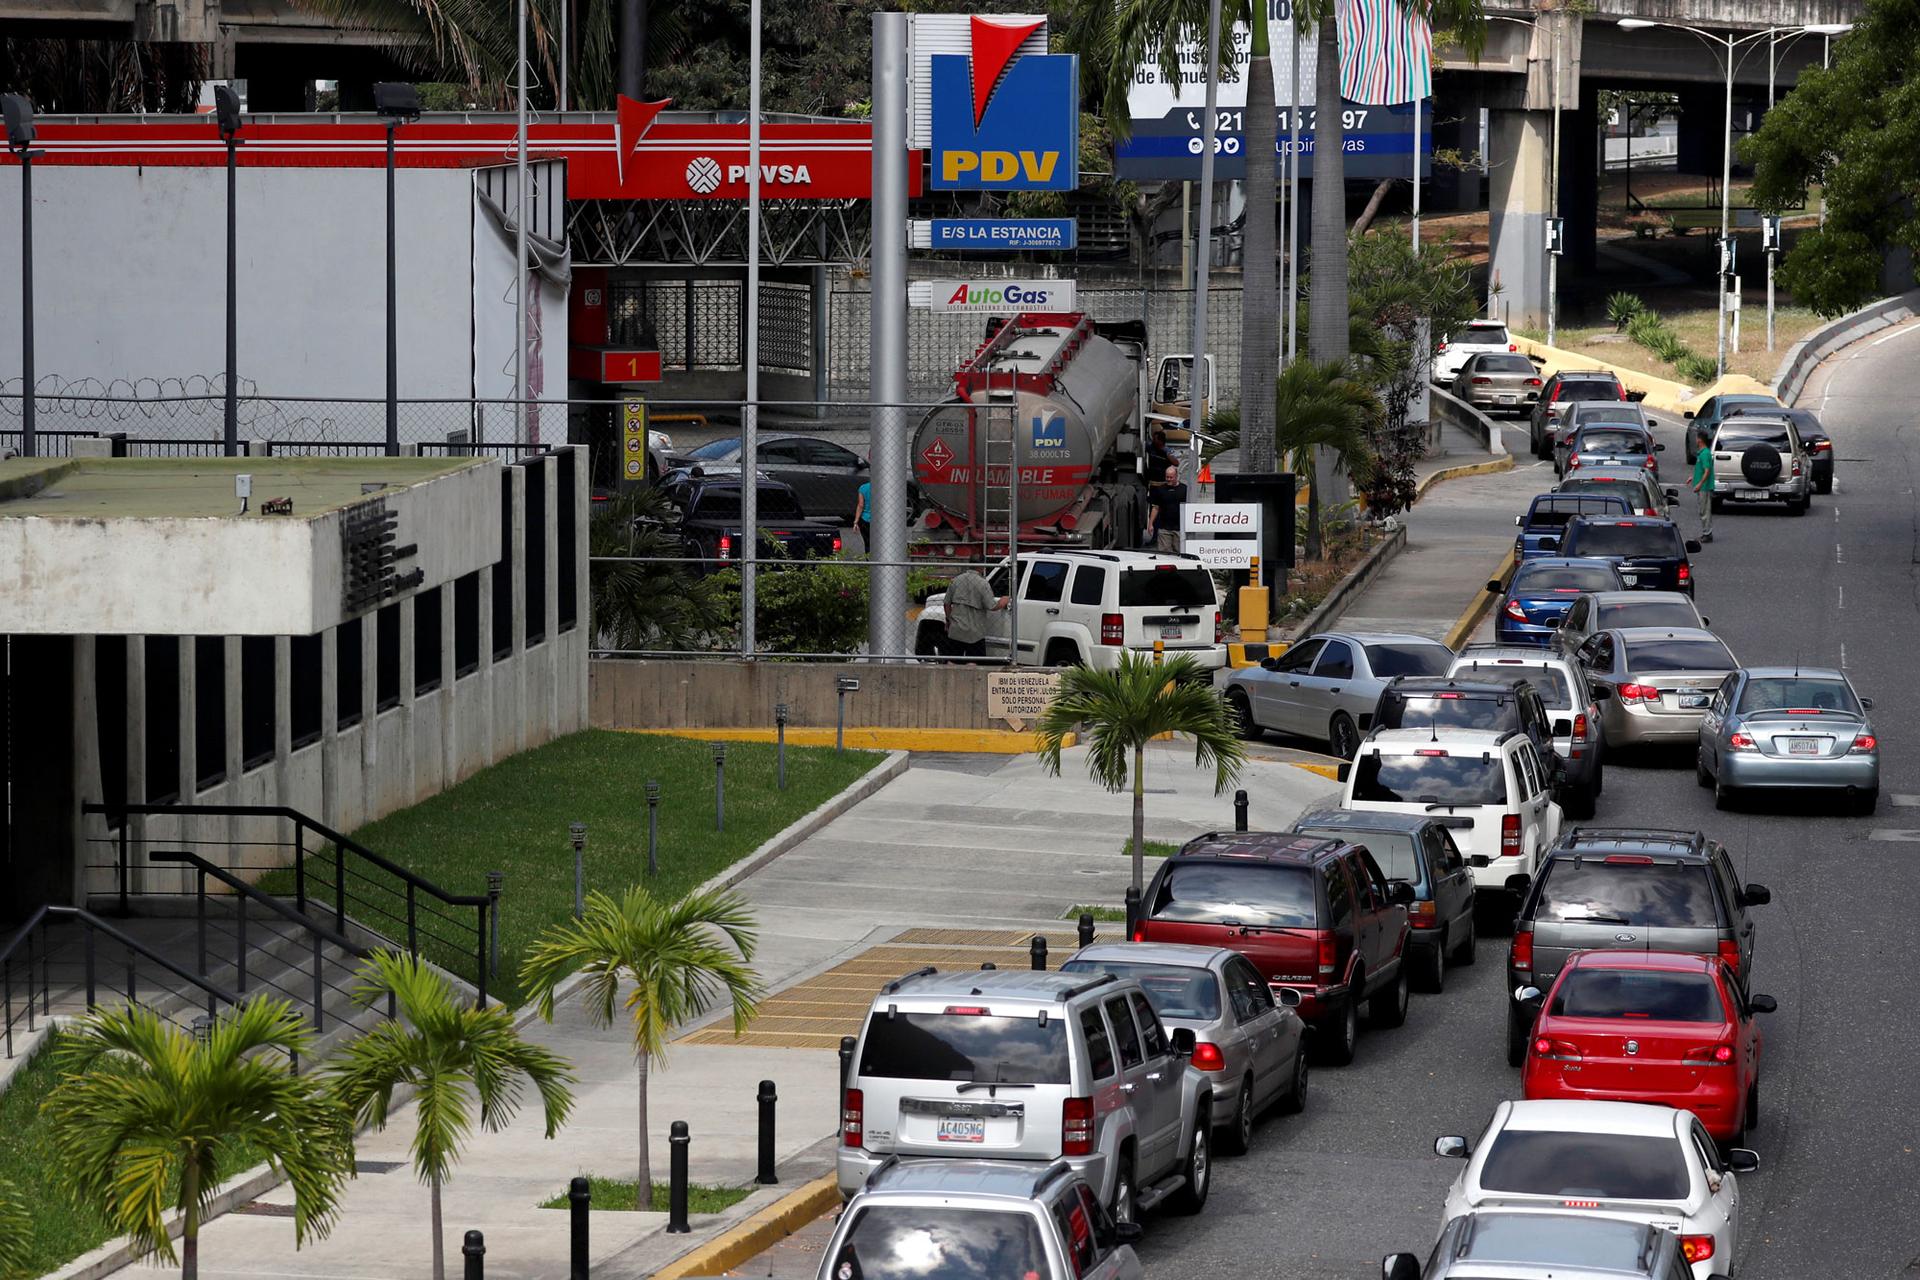 A long line of cars are shown down the street of a gas station in Caracas.